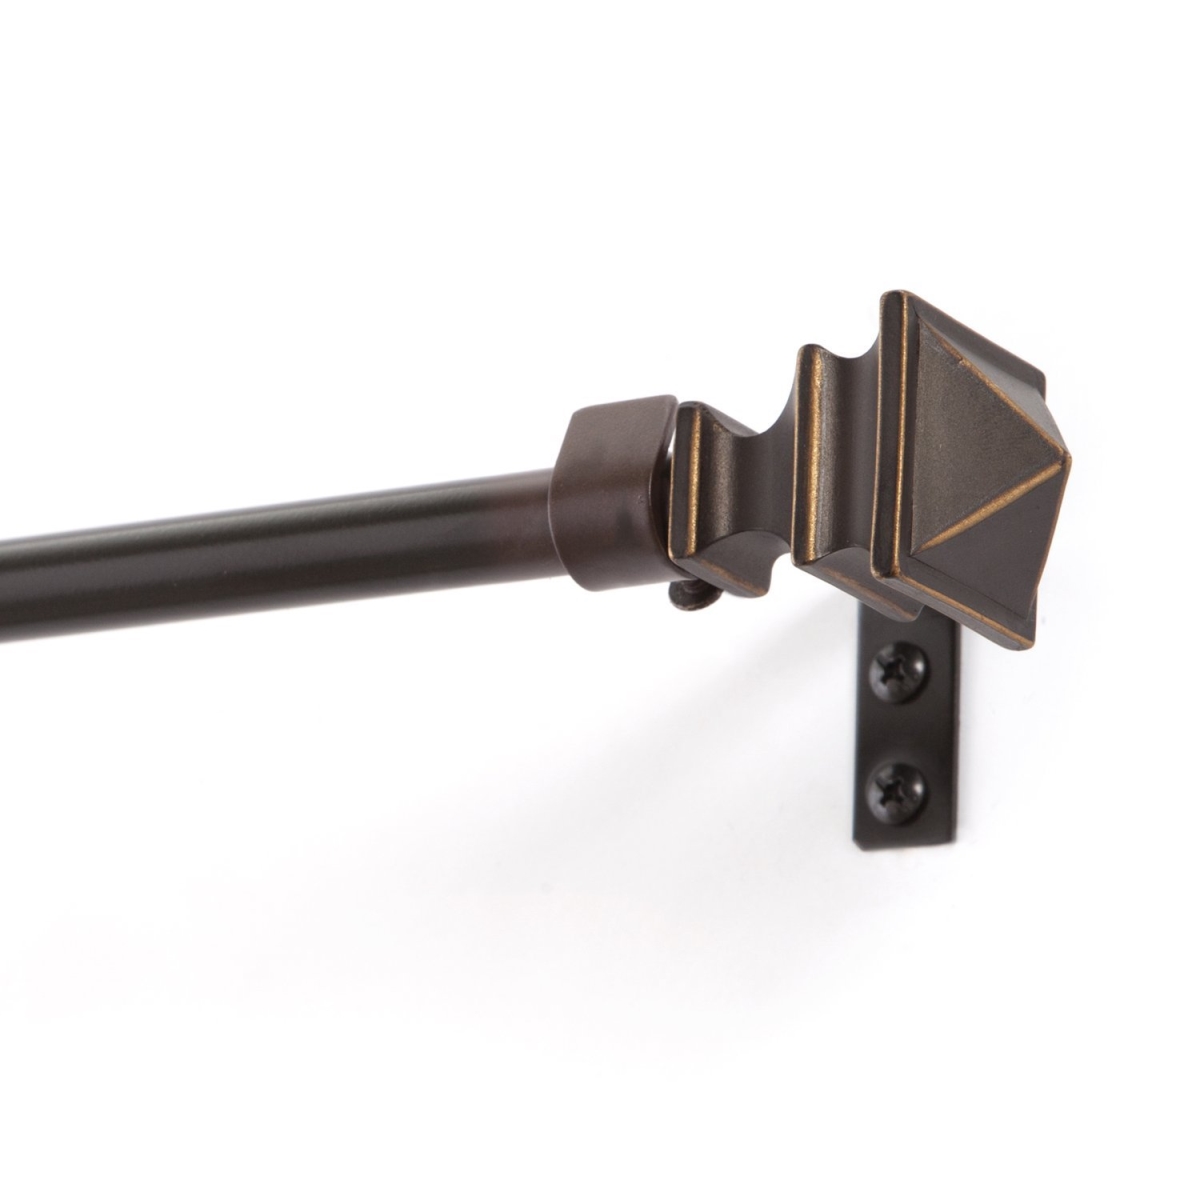 32-lwf1018-2orb 48-88 In. Painted Oil Rubbed Bronze Finish Single Rod Window Hardware With Mocha Finial